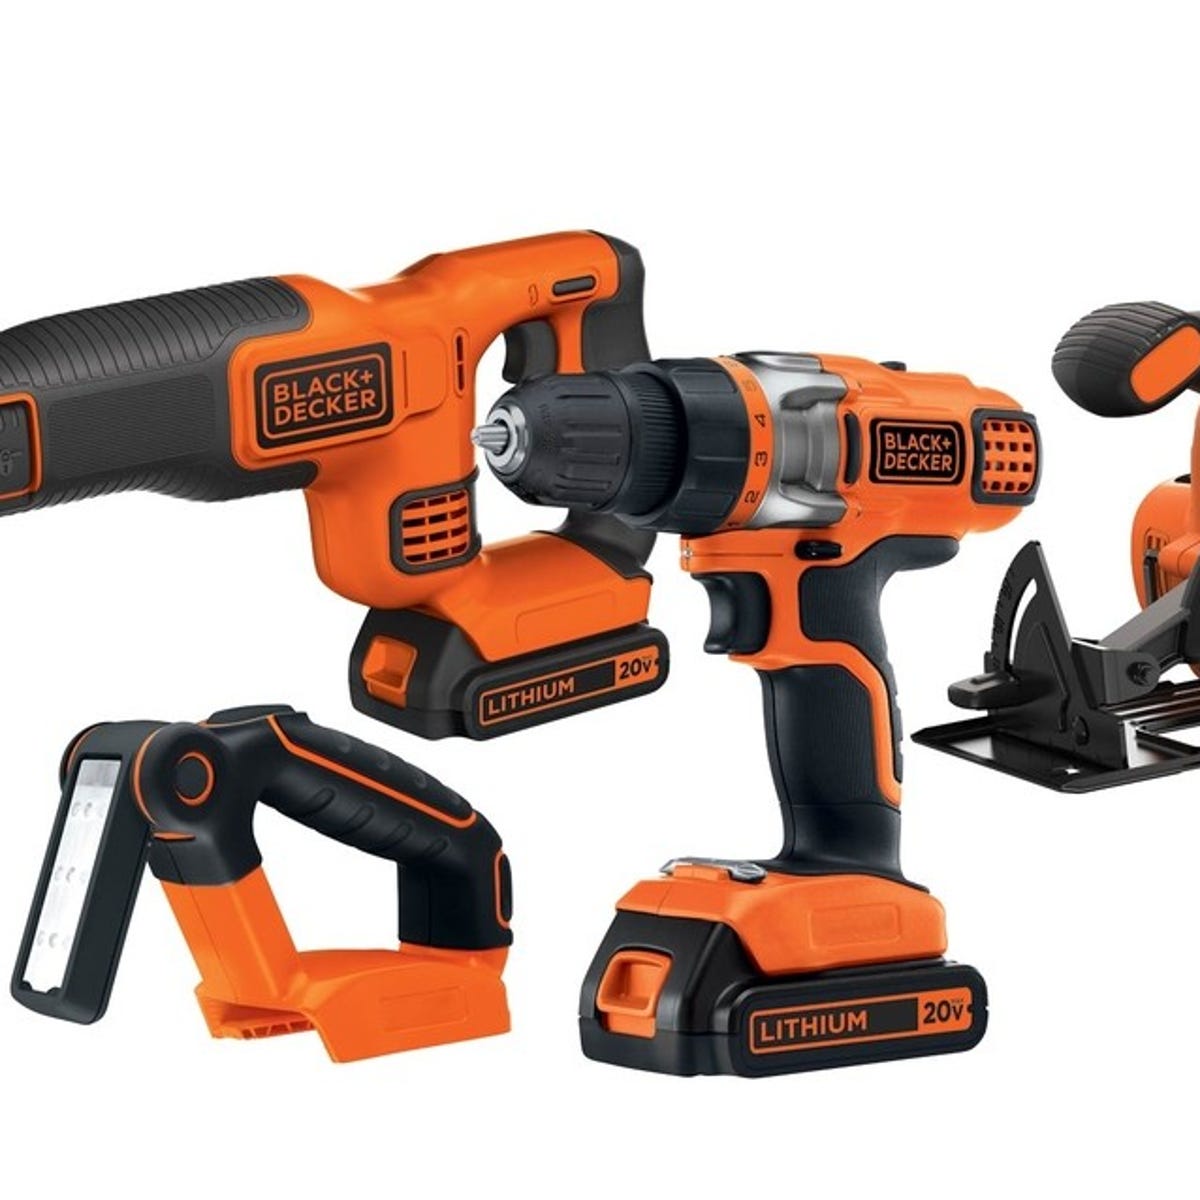 Tackle Your Summer To-Do List With This $79 Power Tool Combo Kit